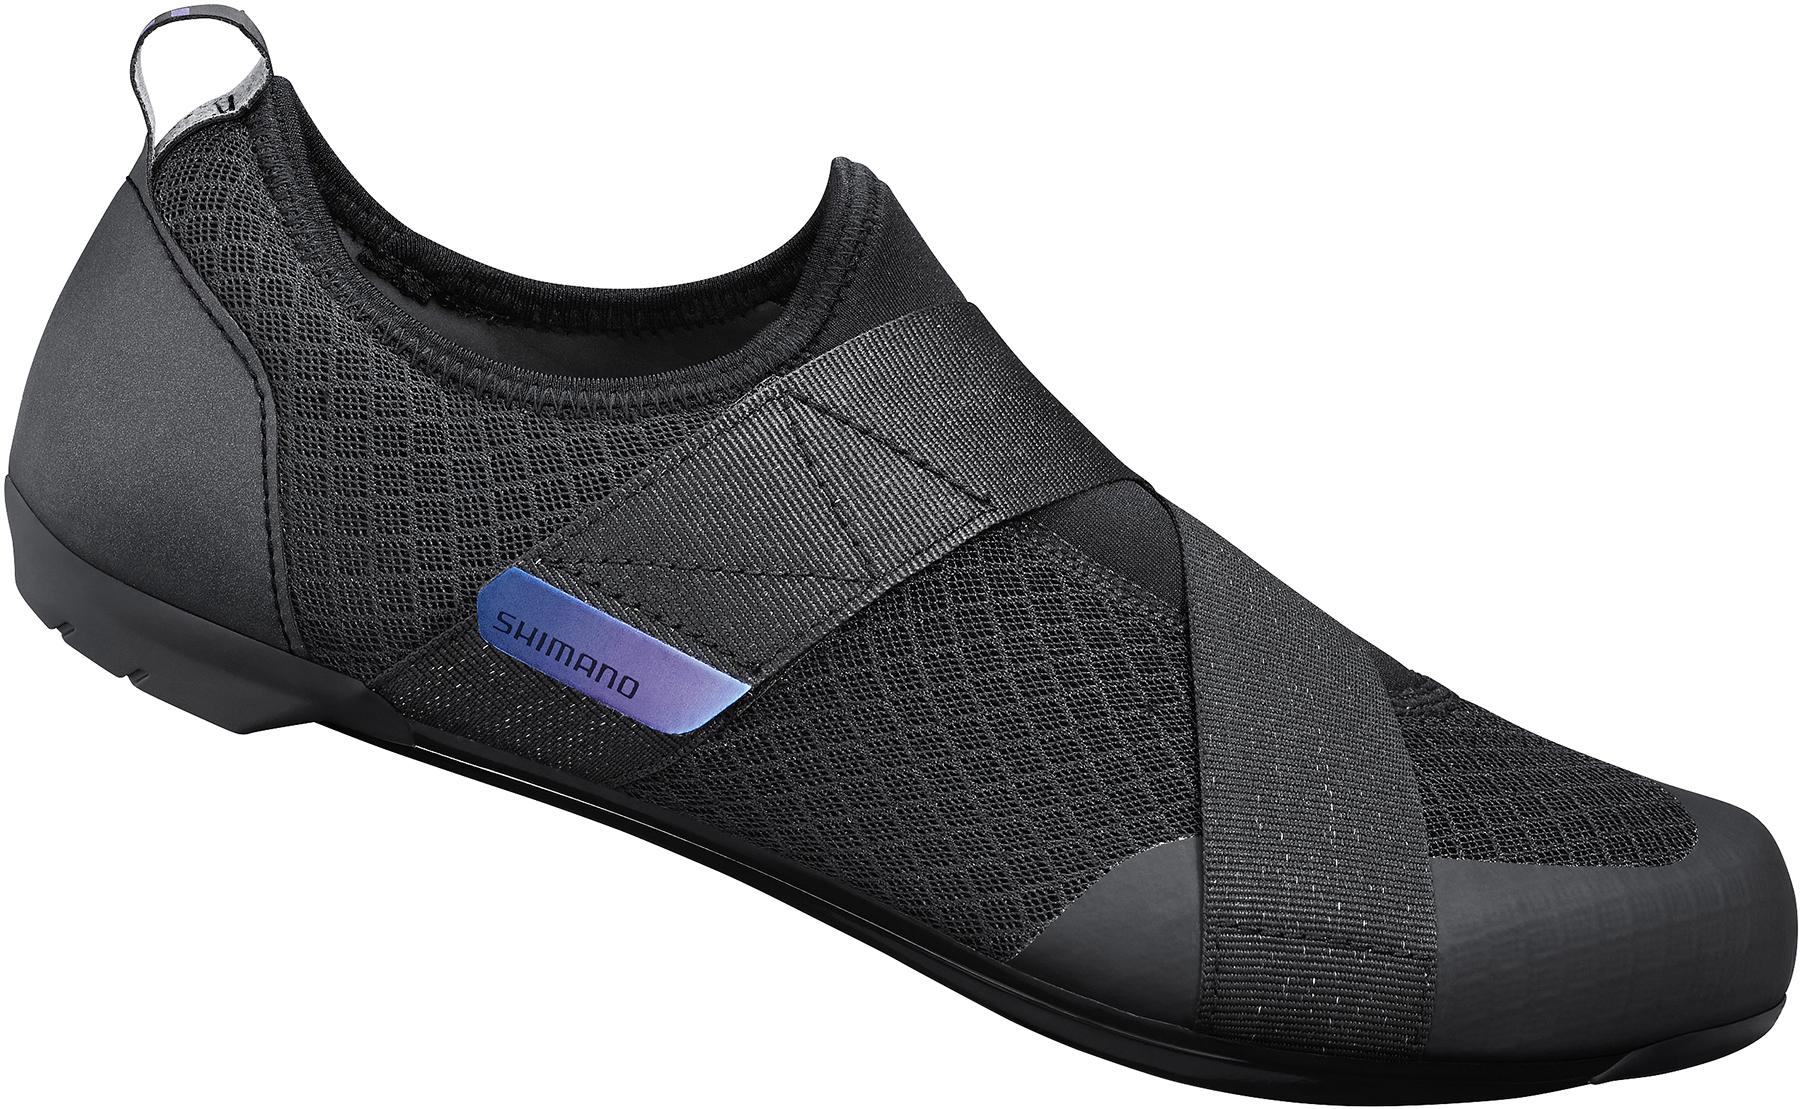 Shimano Ic1 Indoor Spin Cycling Shoes  Black